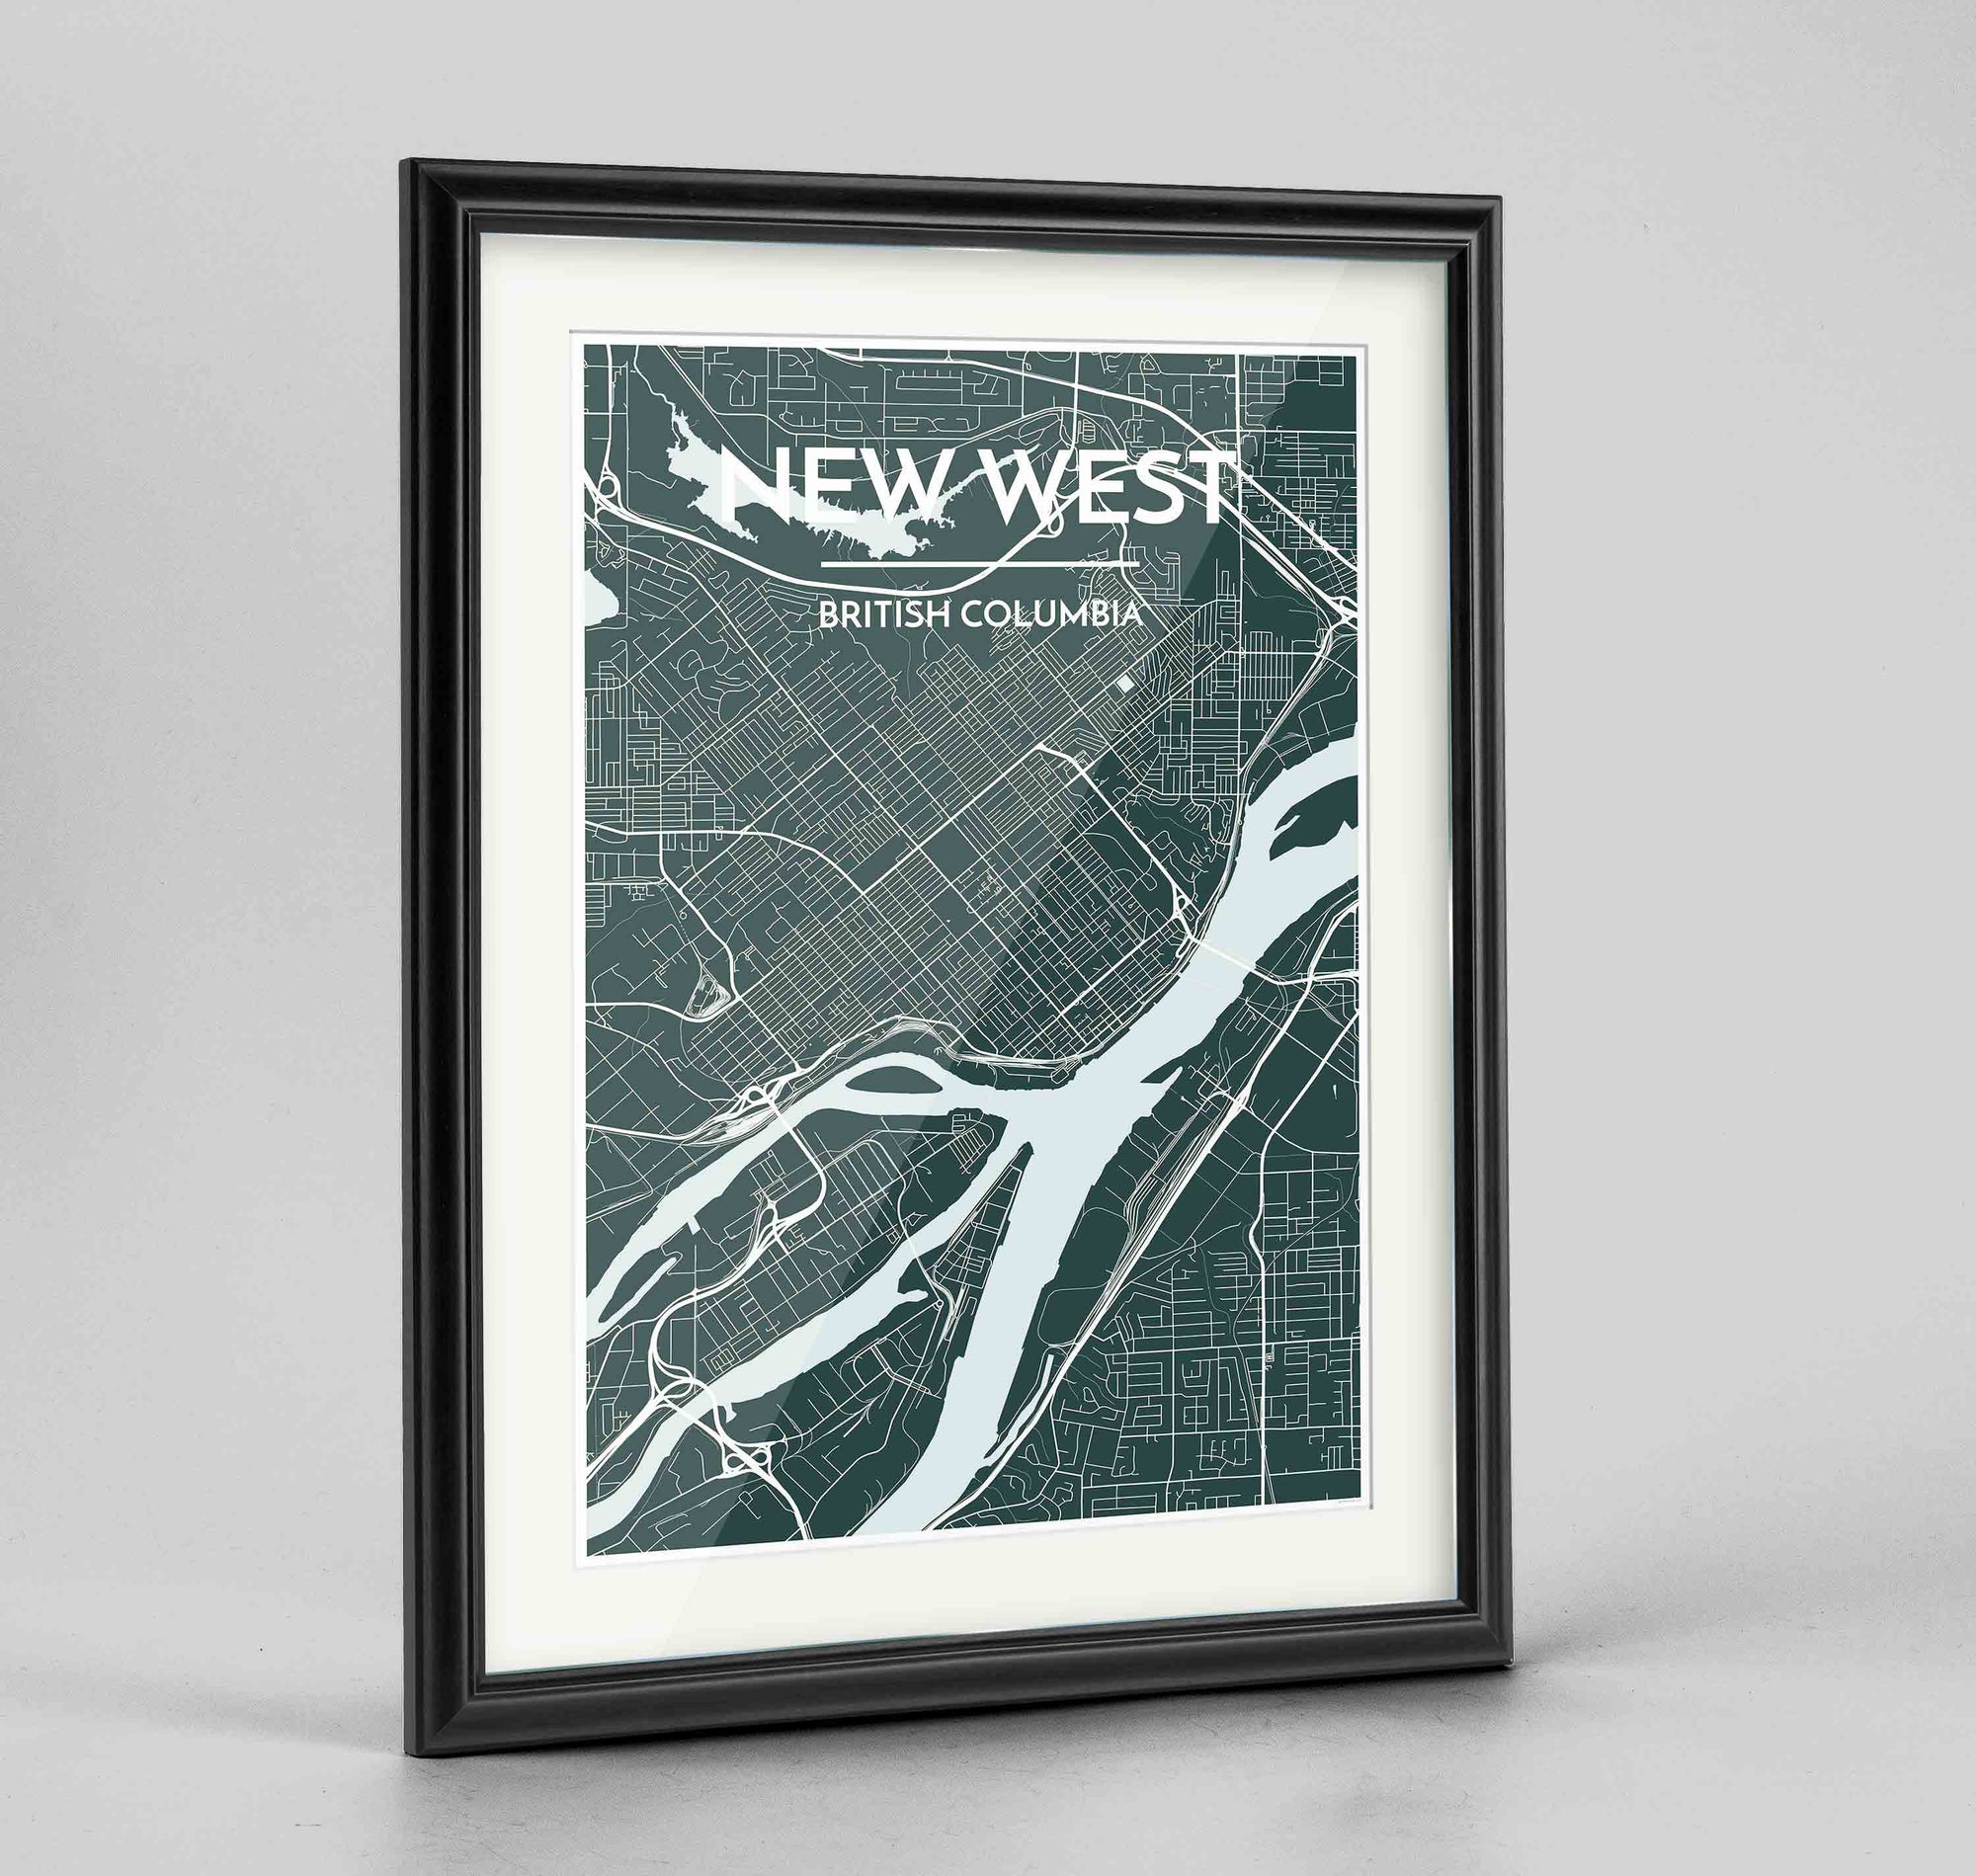 Framed New Westminster City Map Art Print 24x36" Traditional Black frame Point Two Design Group